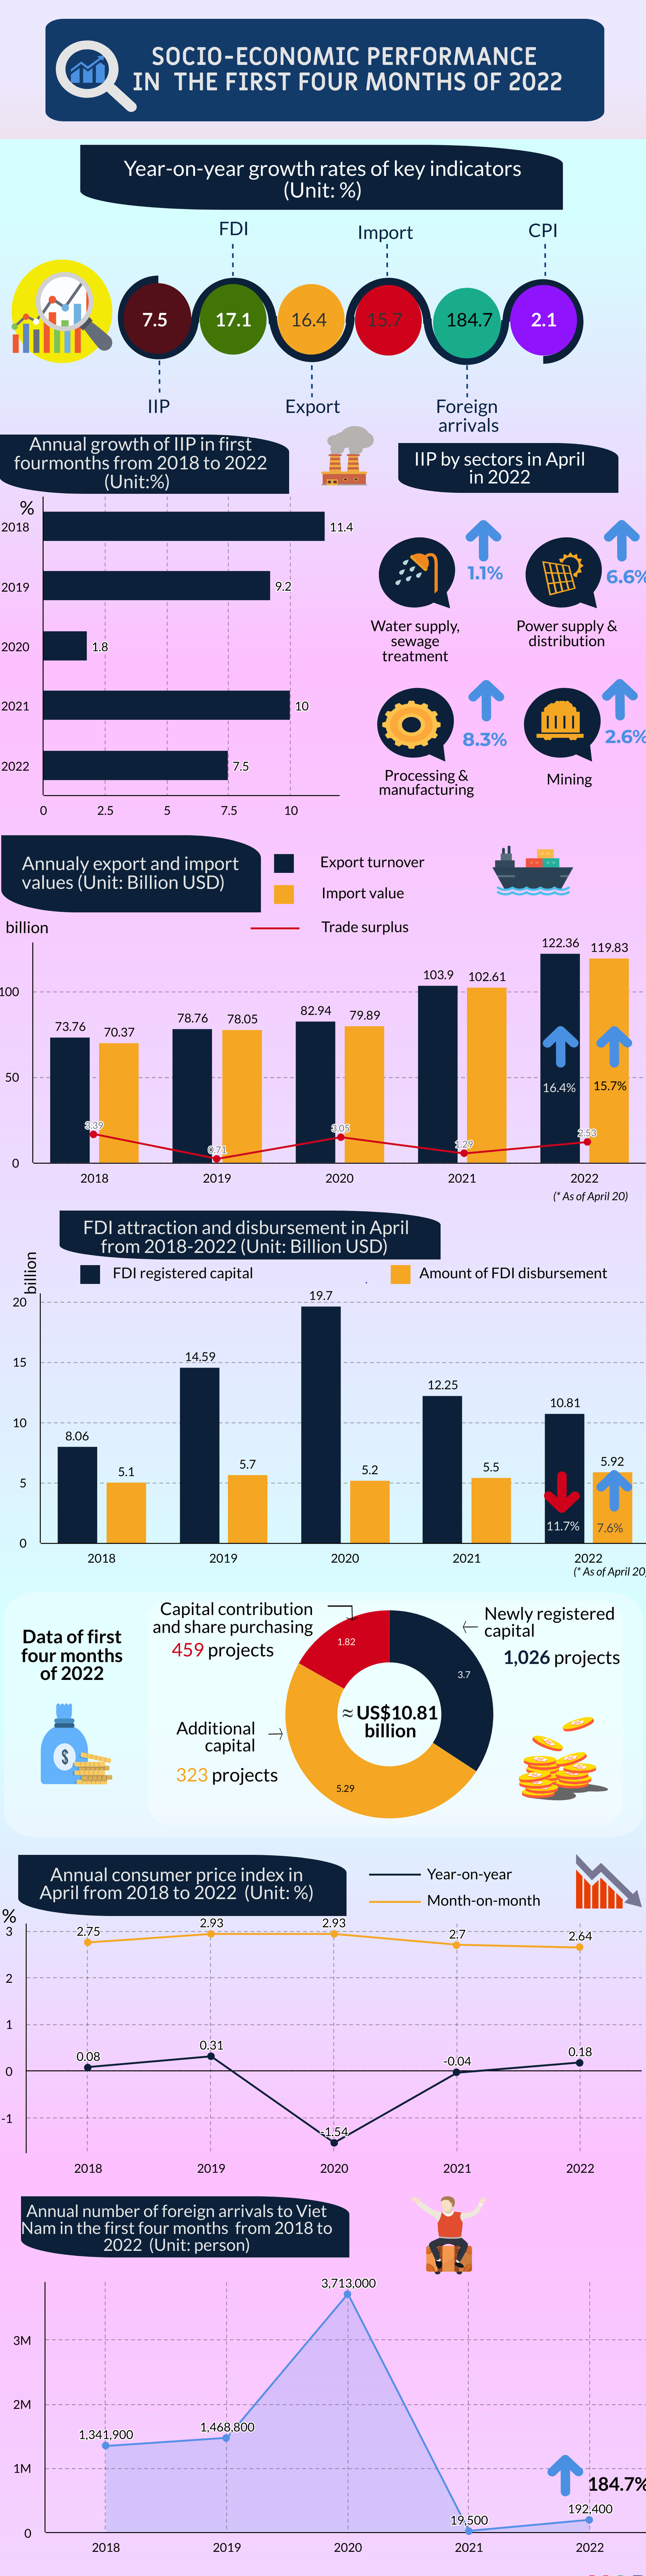 Infographic: Socio-economic performance in first four months 2022 - Ảnh 1.